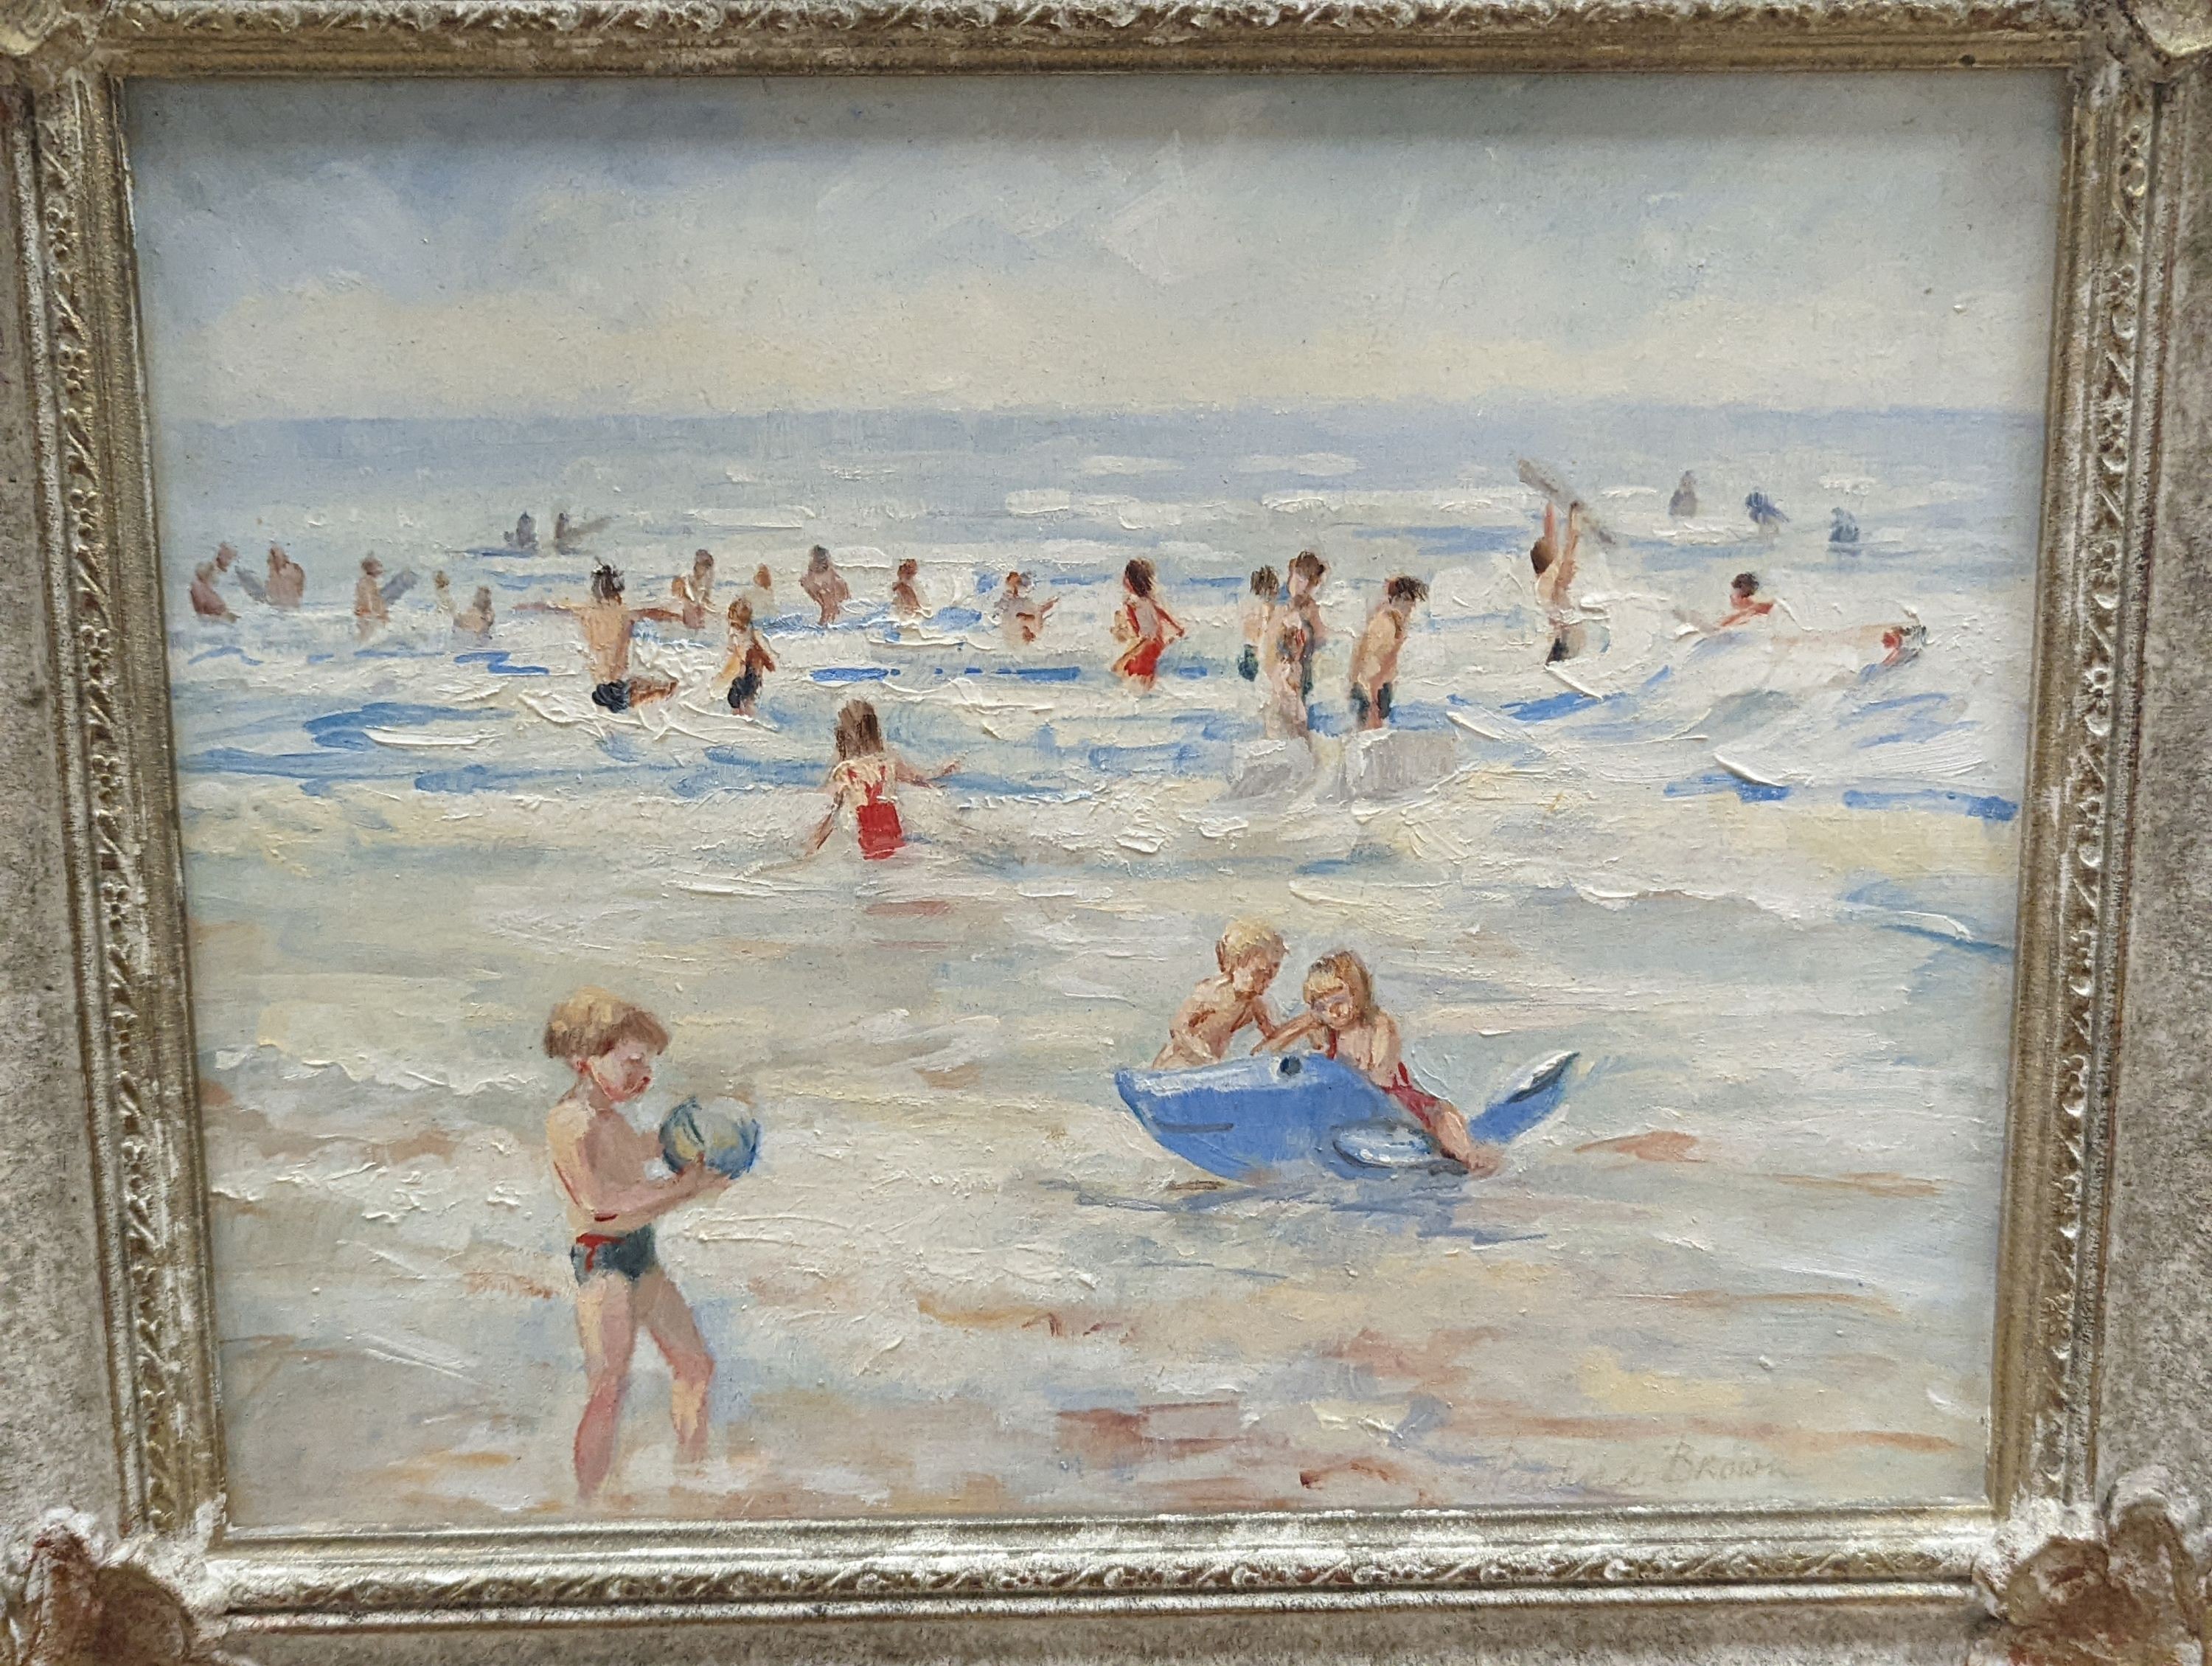 Pauline Brown (b.1926), pair of oil on boards, depicting Brighton Summer beach-scapes, signed, 19 x 24cm